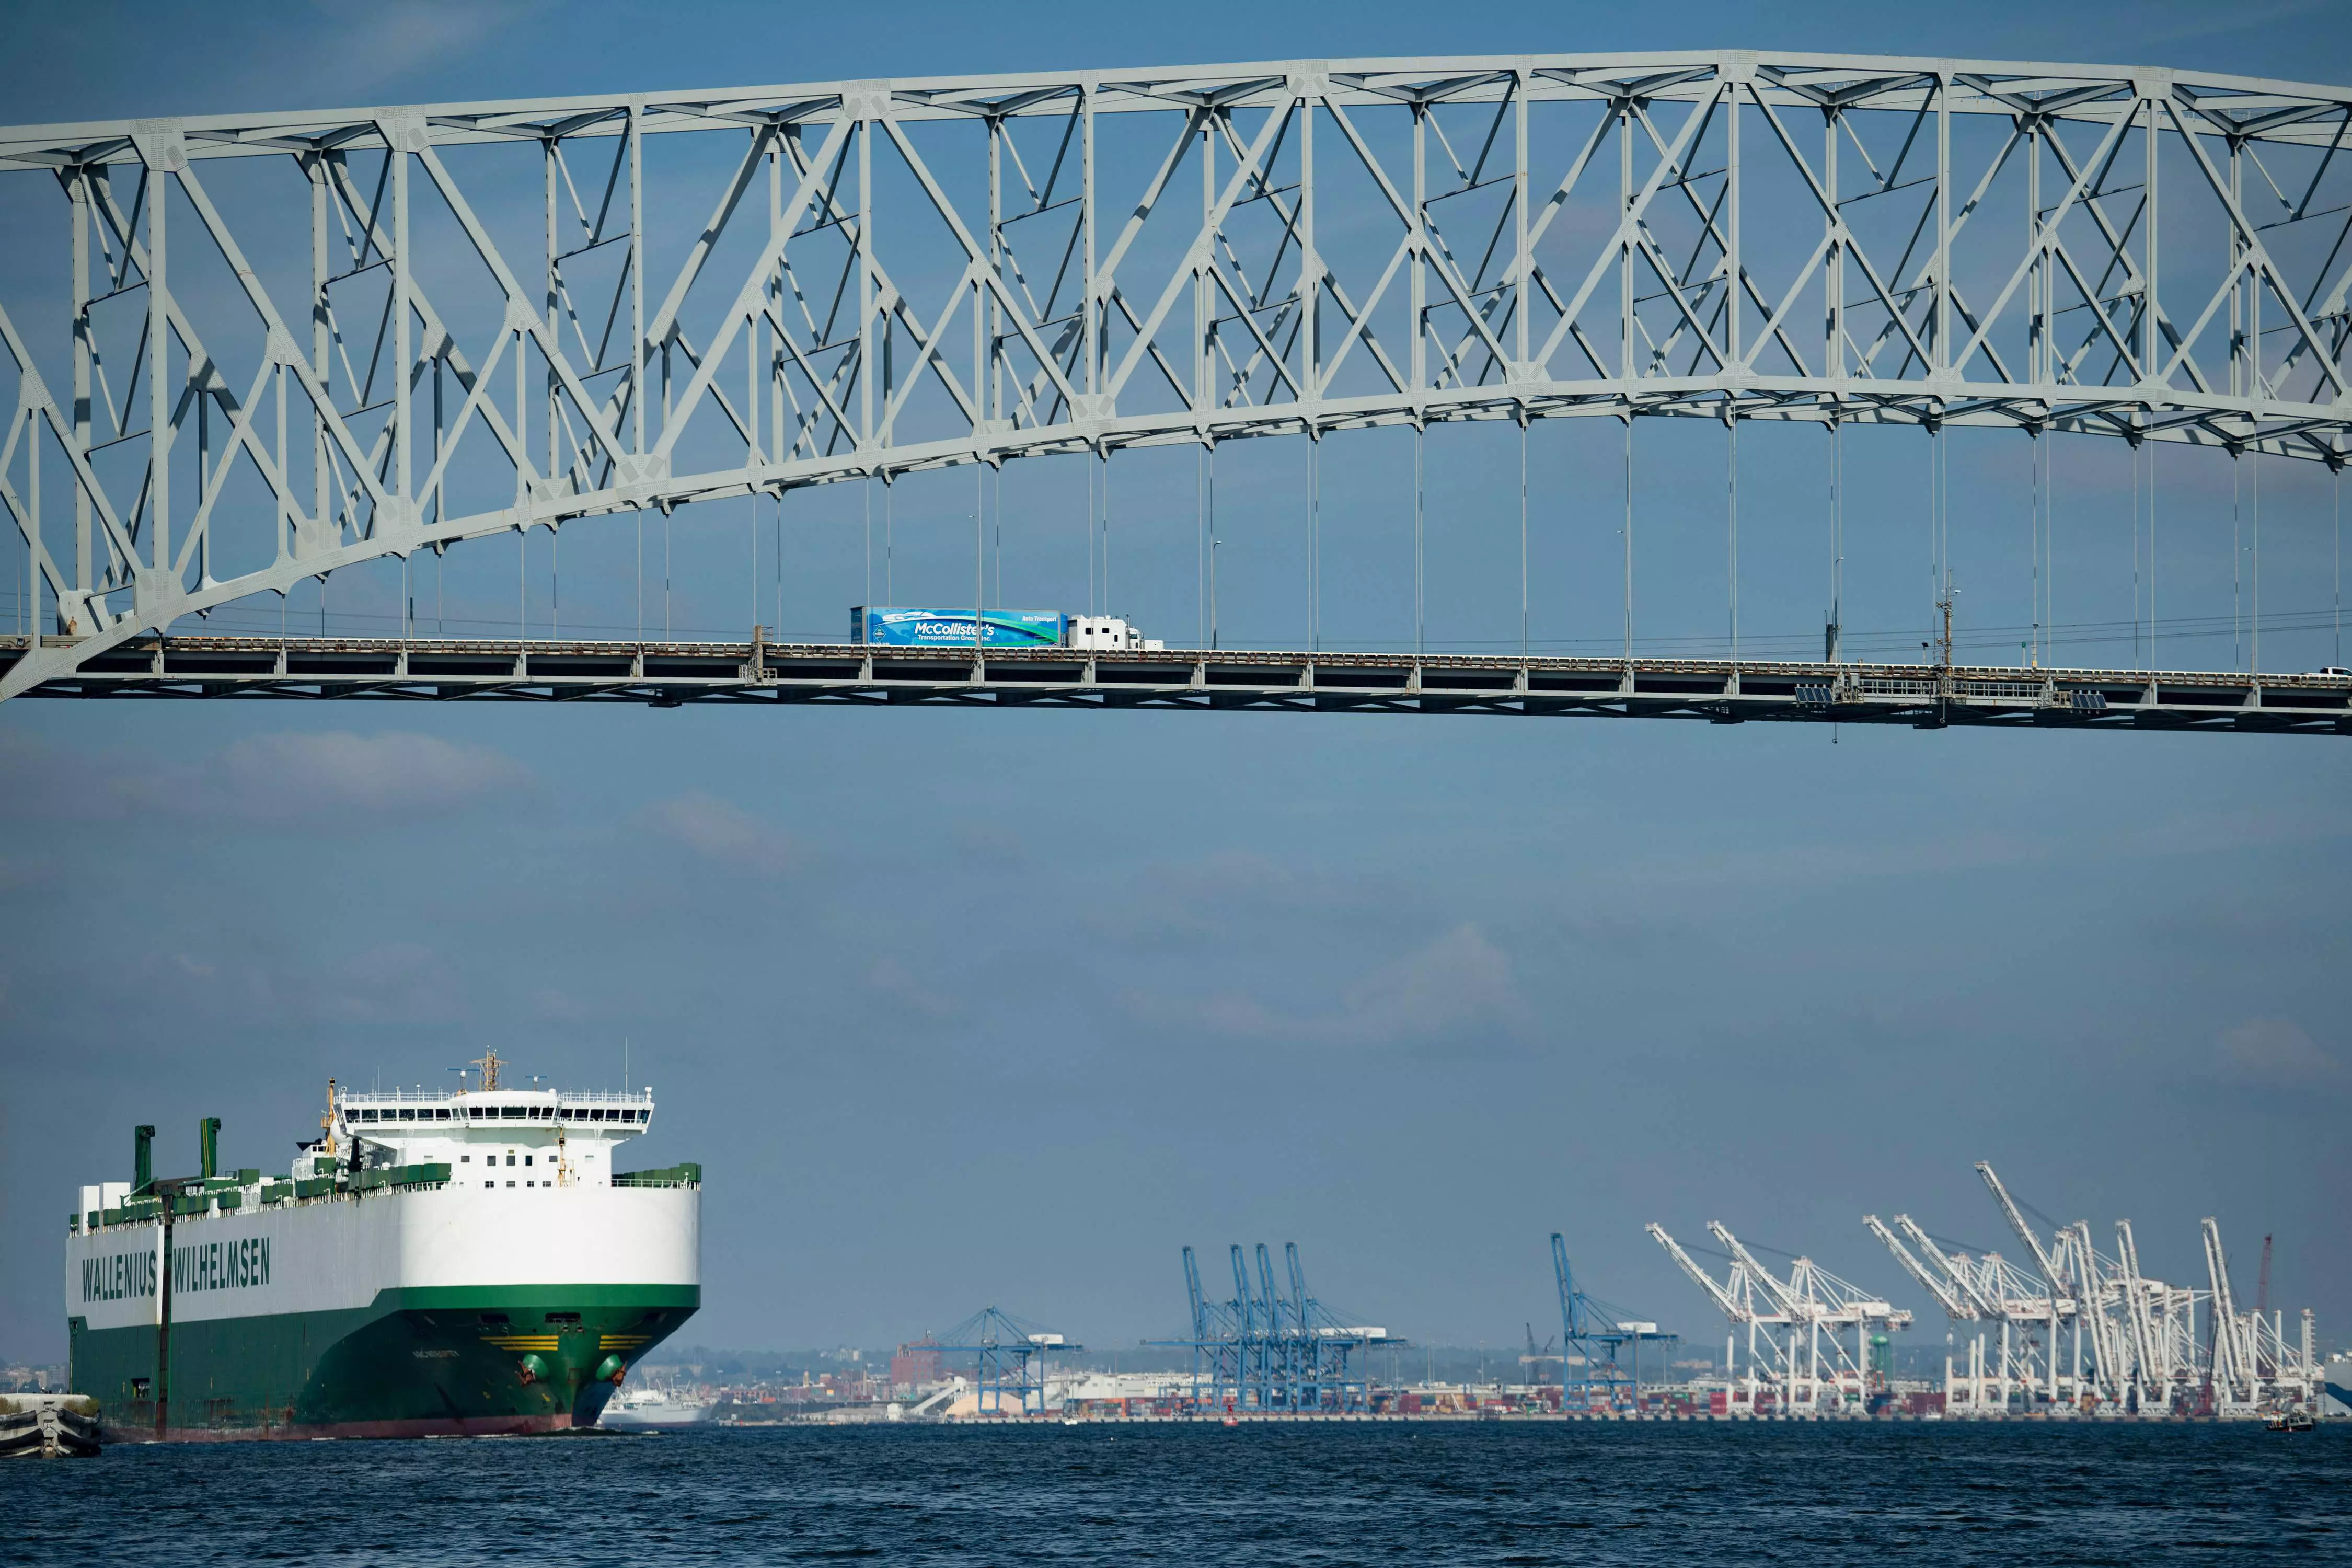 Key Bridge in Baltimore collapses after being hit by cargo ship